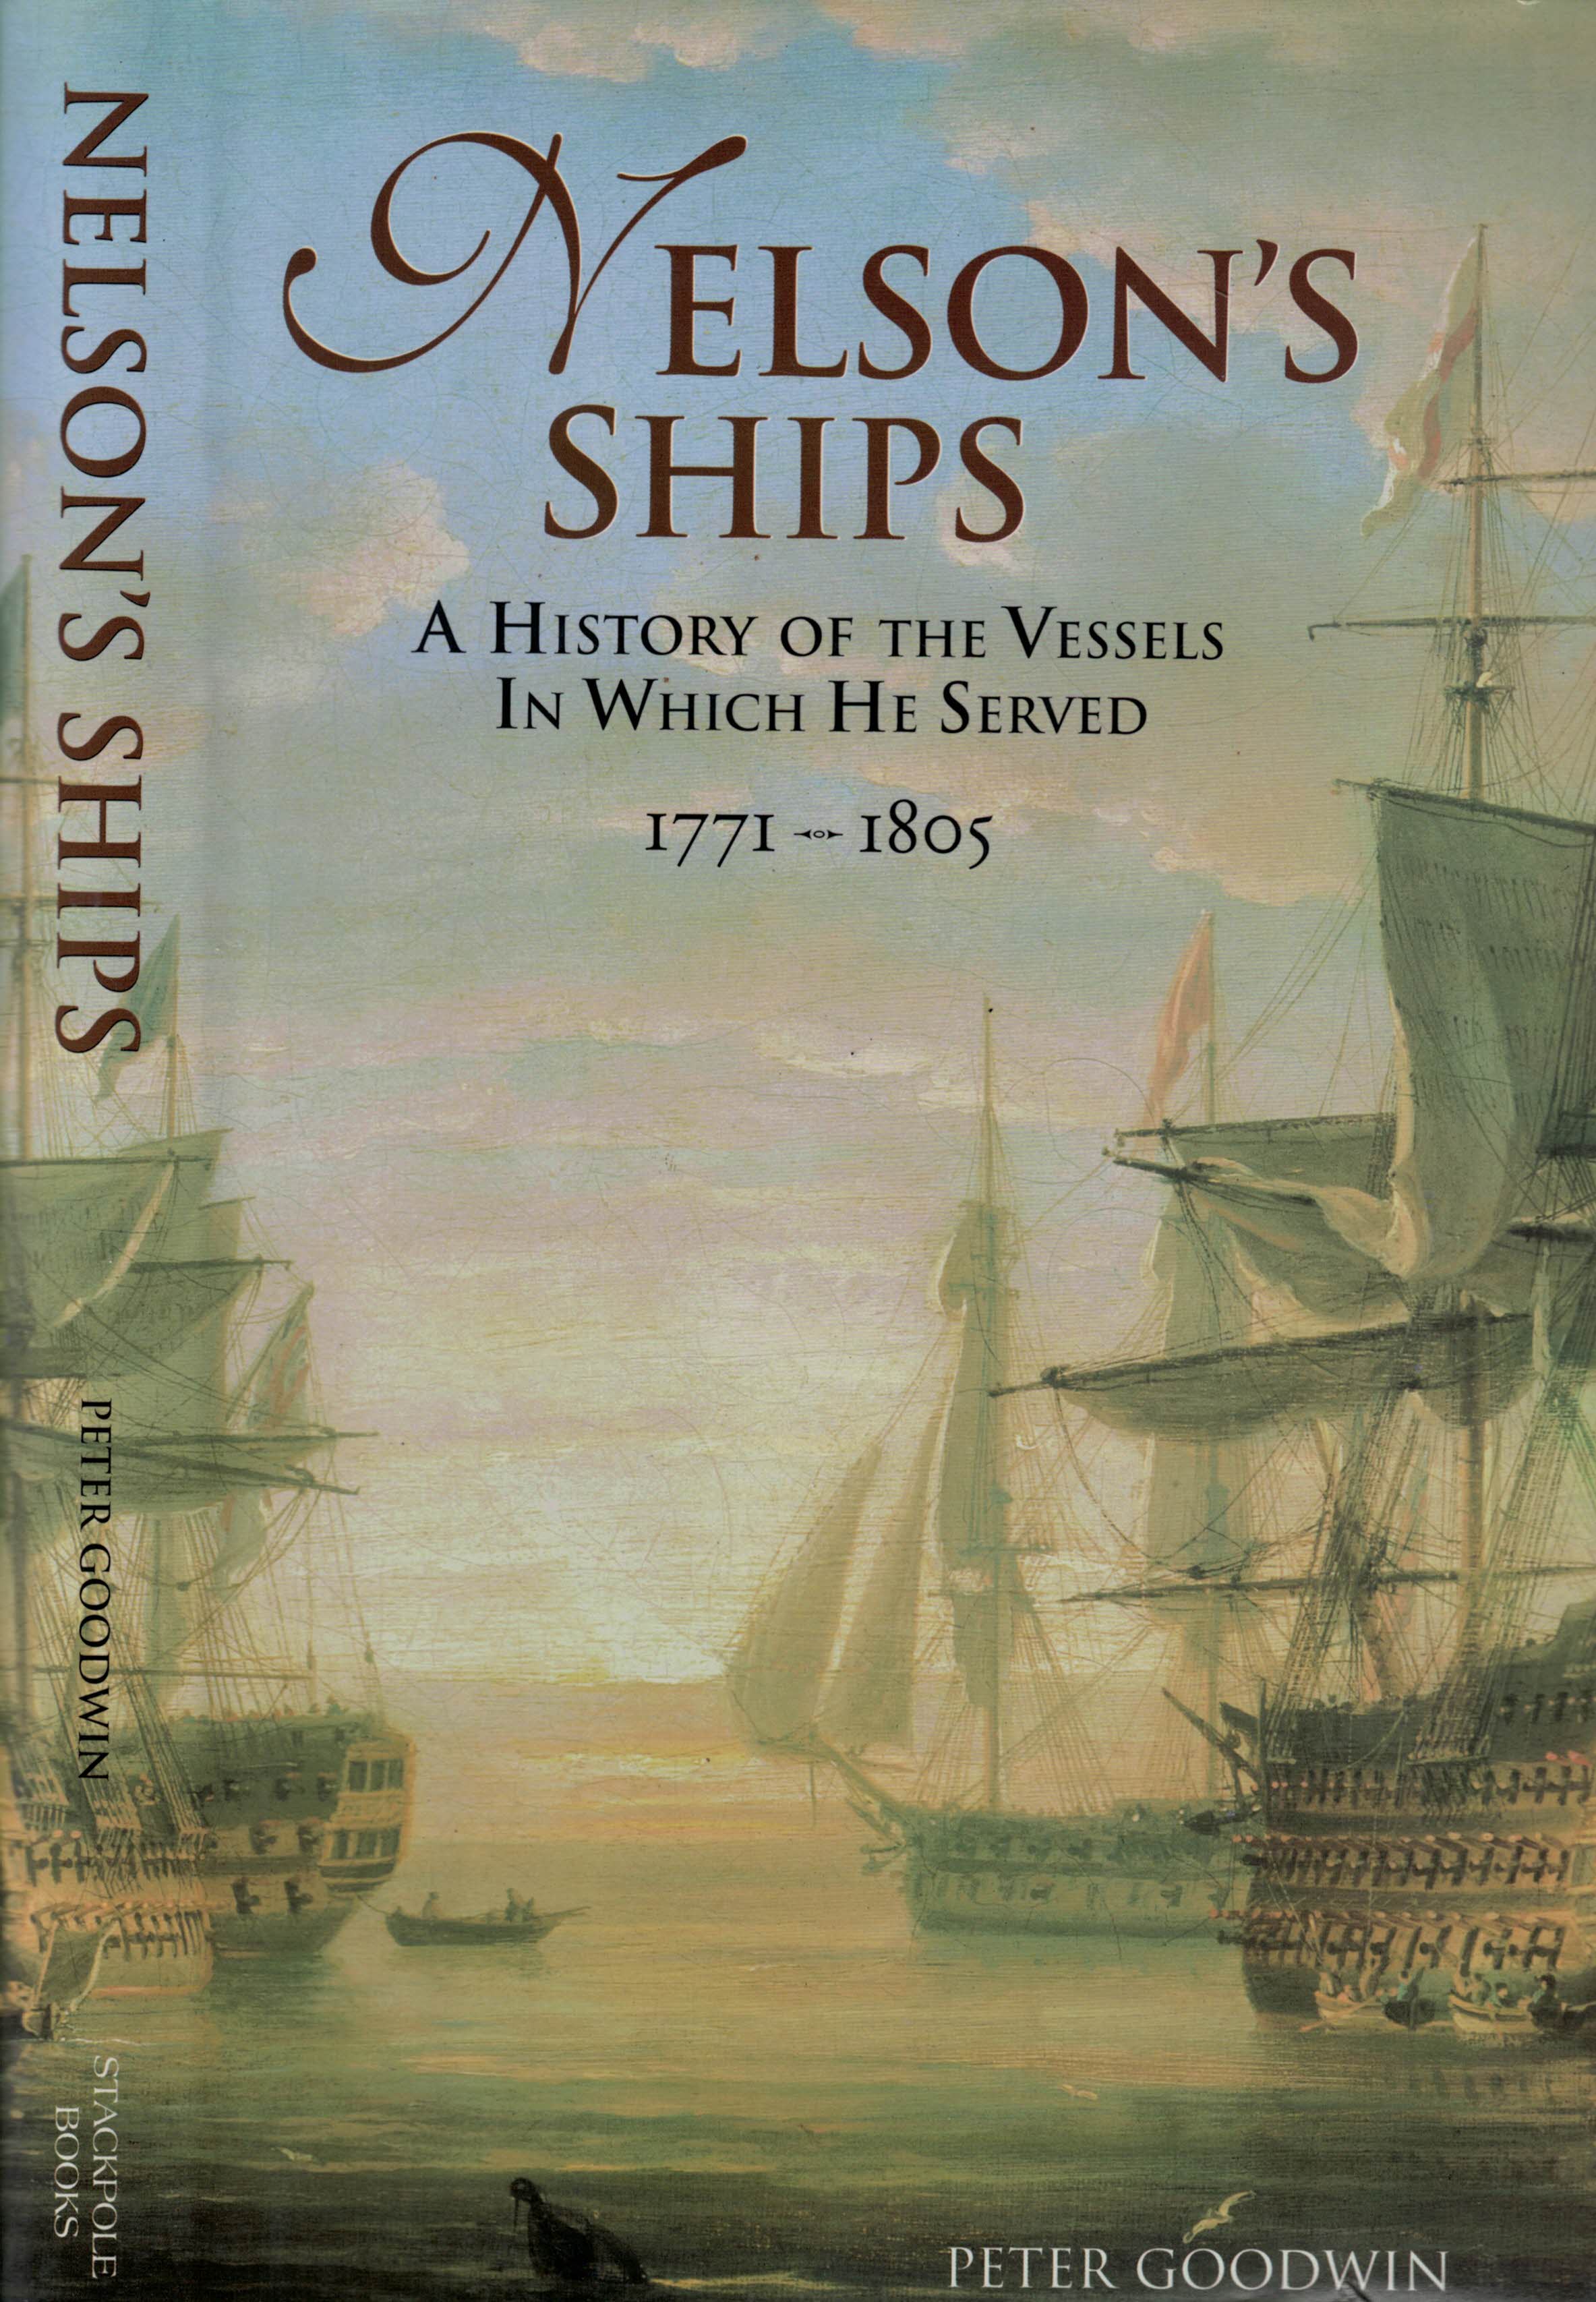 Nelson's Ships. A History of the Vessels in Which He Served. 1771-1805.